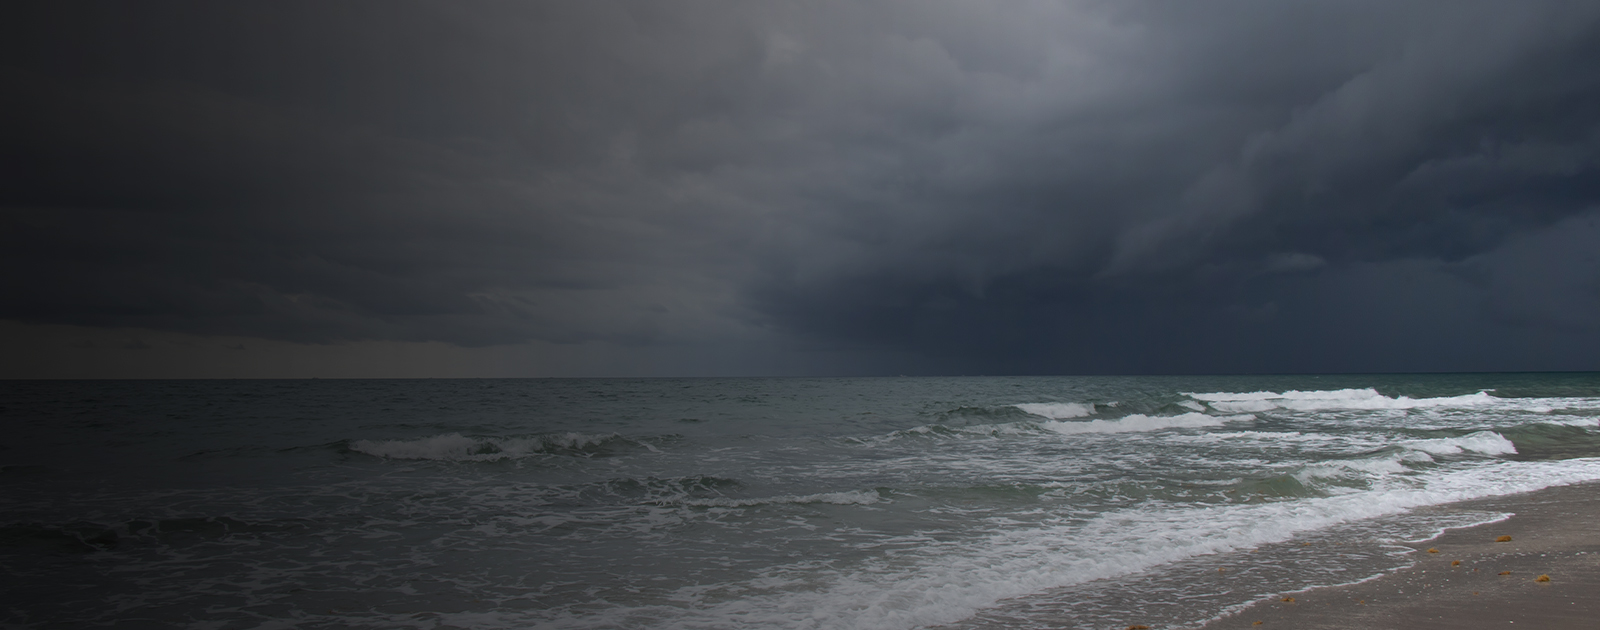 Stormy sky over beach in Florida.